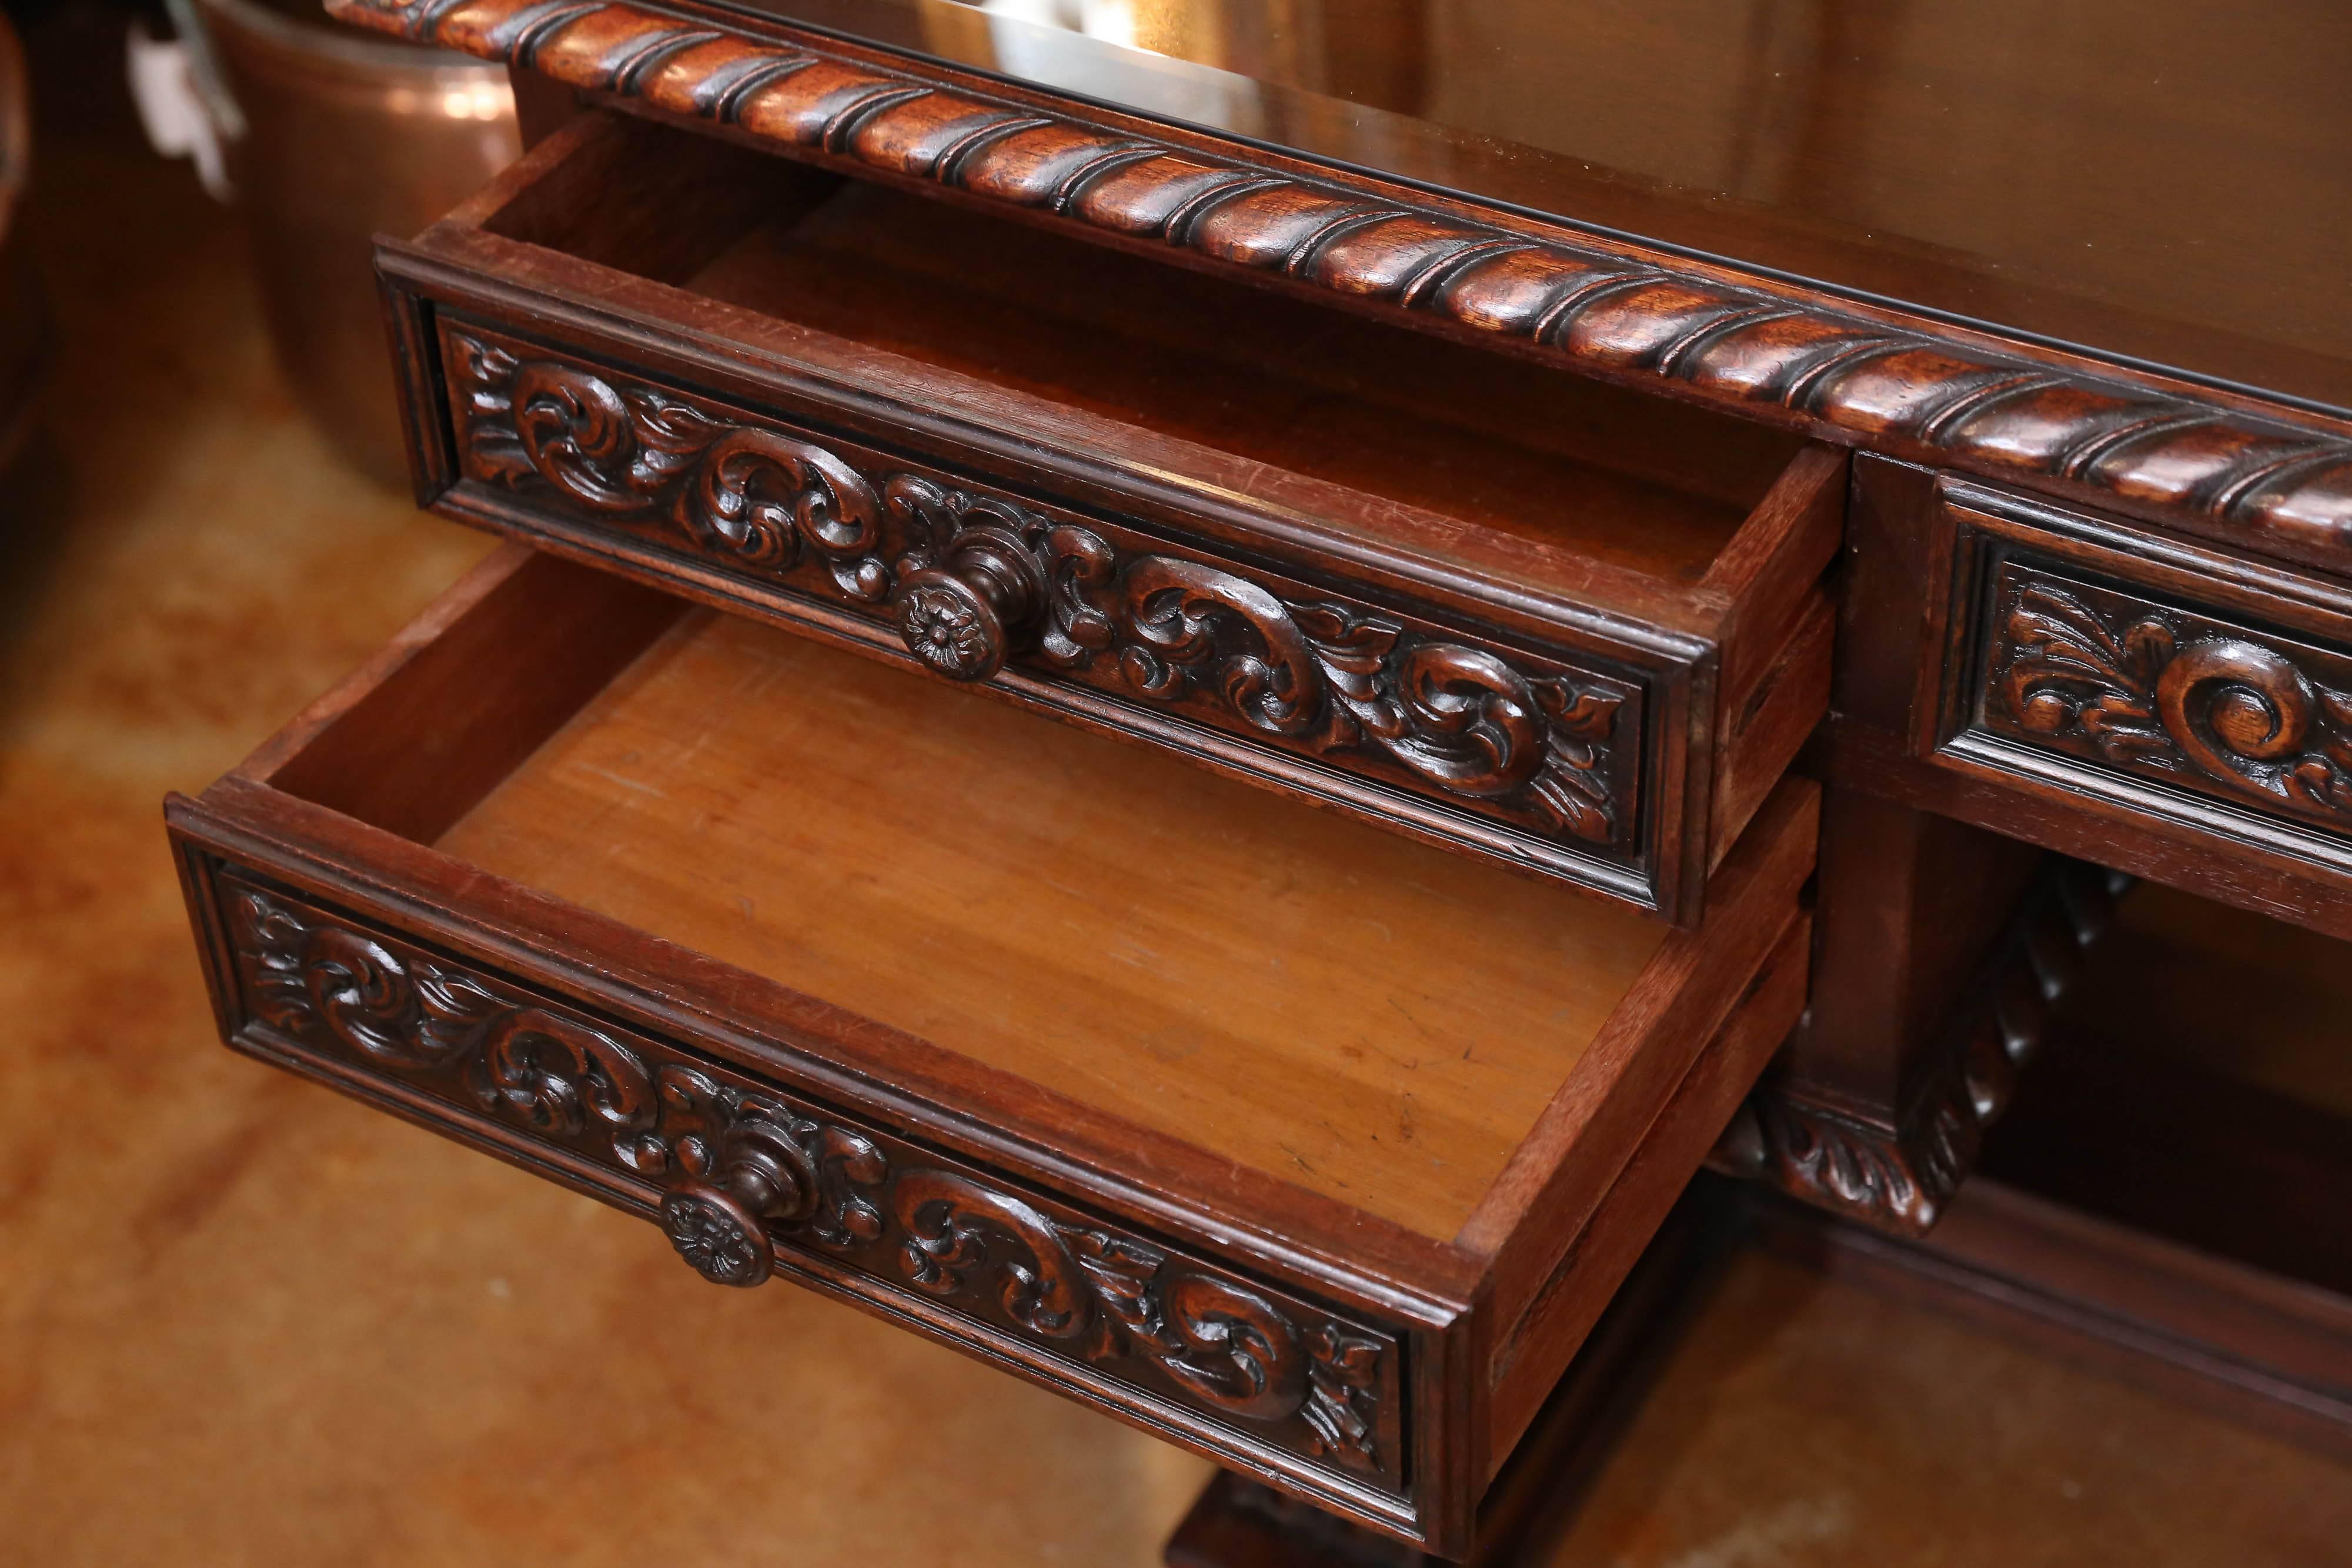 Antique Spanish Desk Carved in Mahogany with Serpentine Curved Legs 2